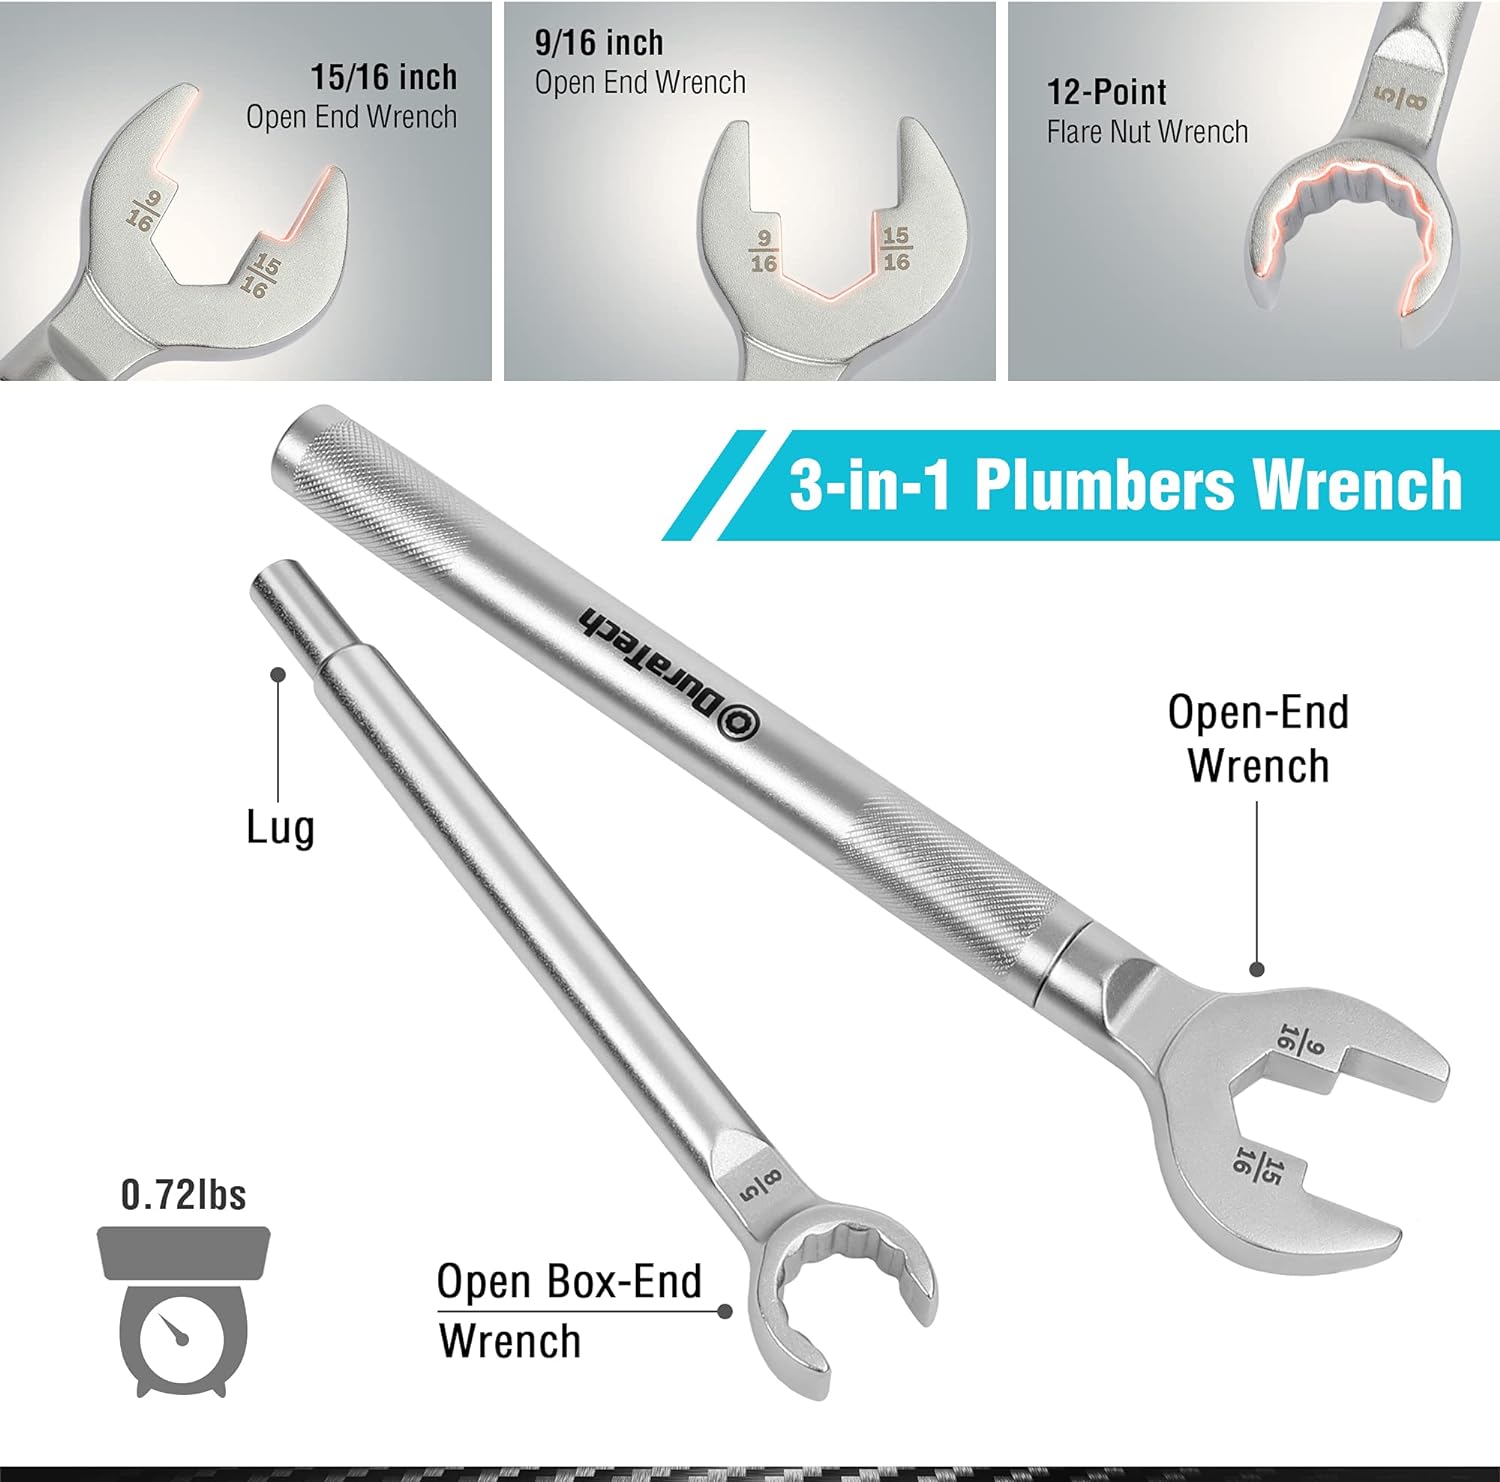 DURATECH 3-in-1 Plumber Wrench Review